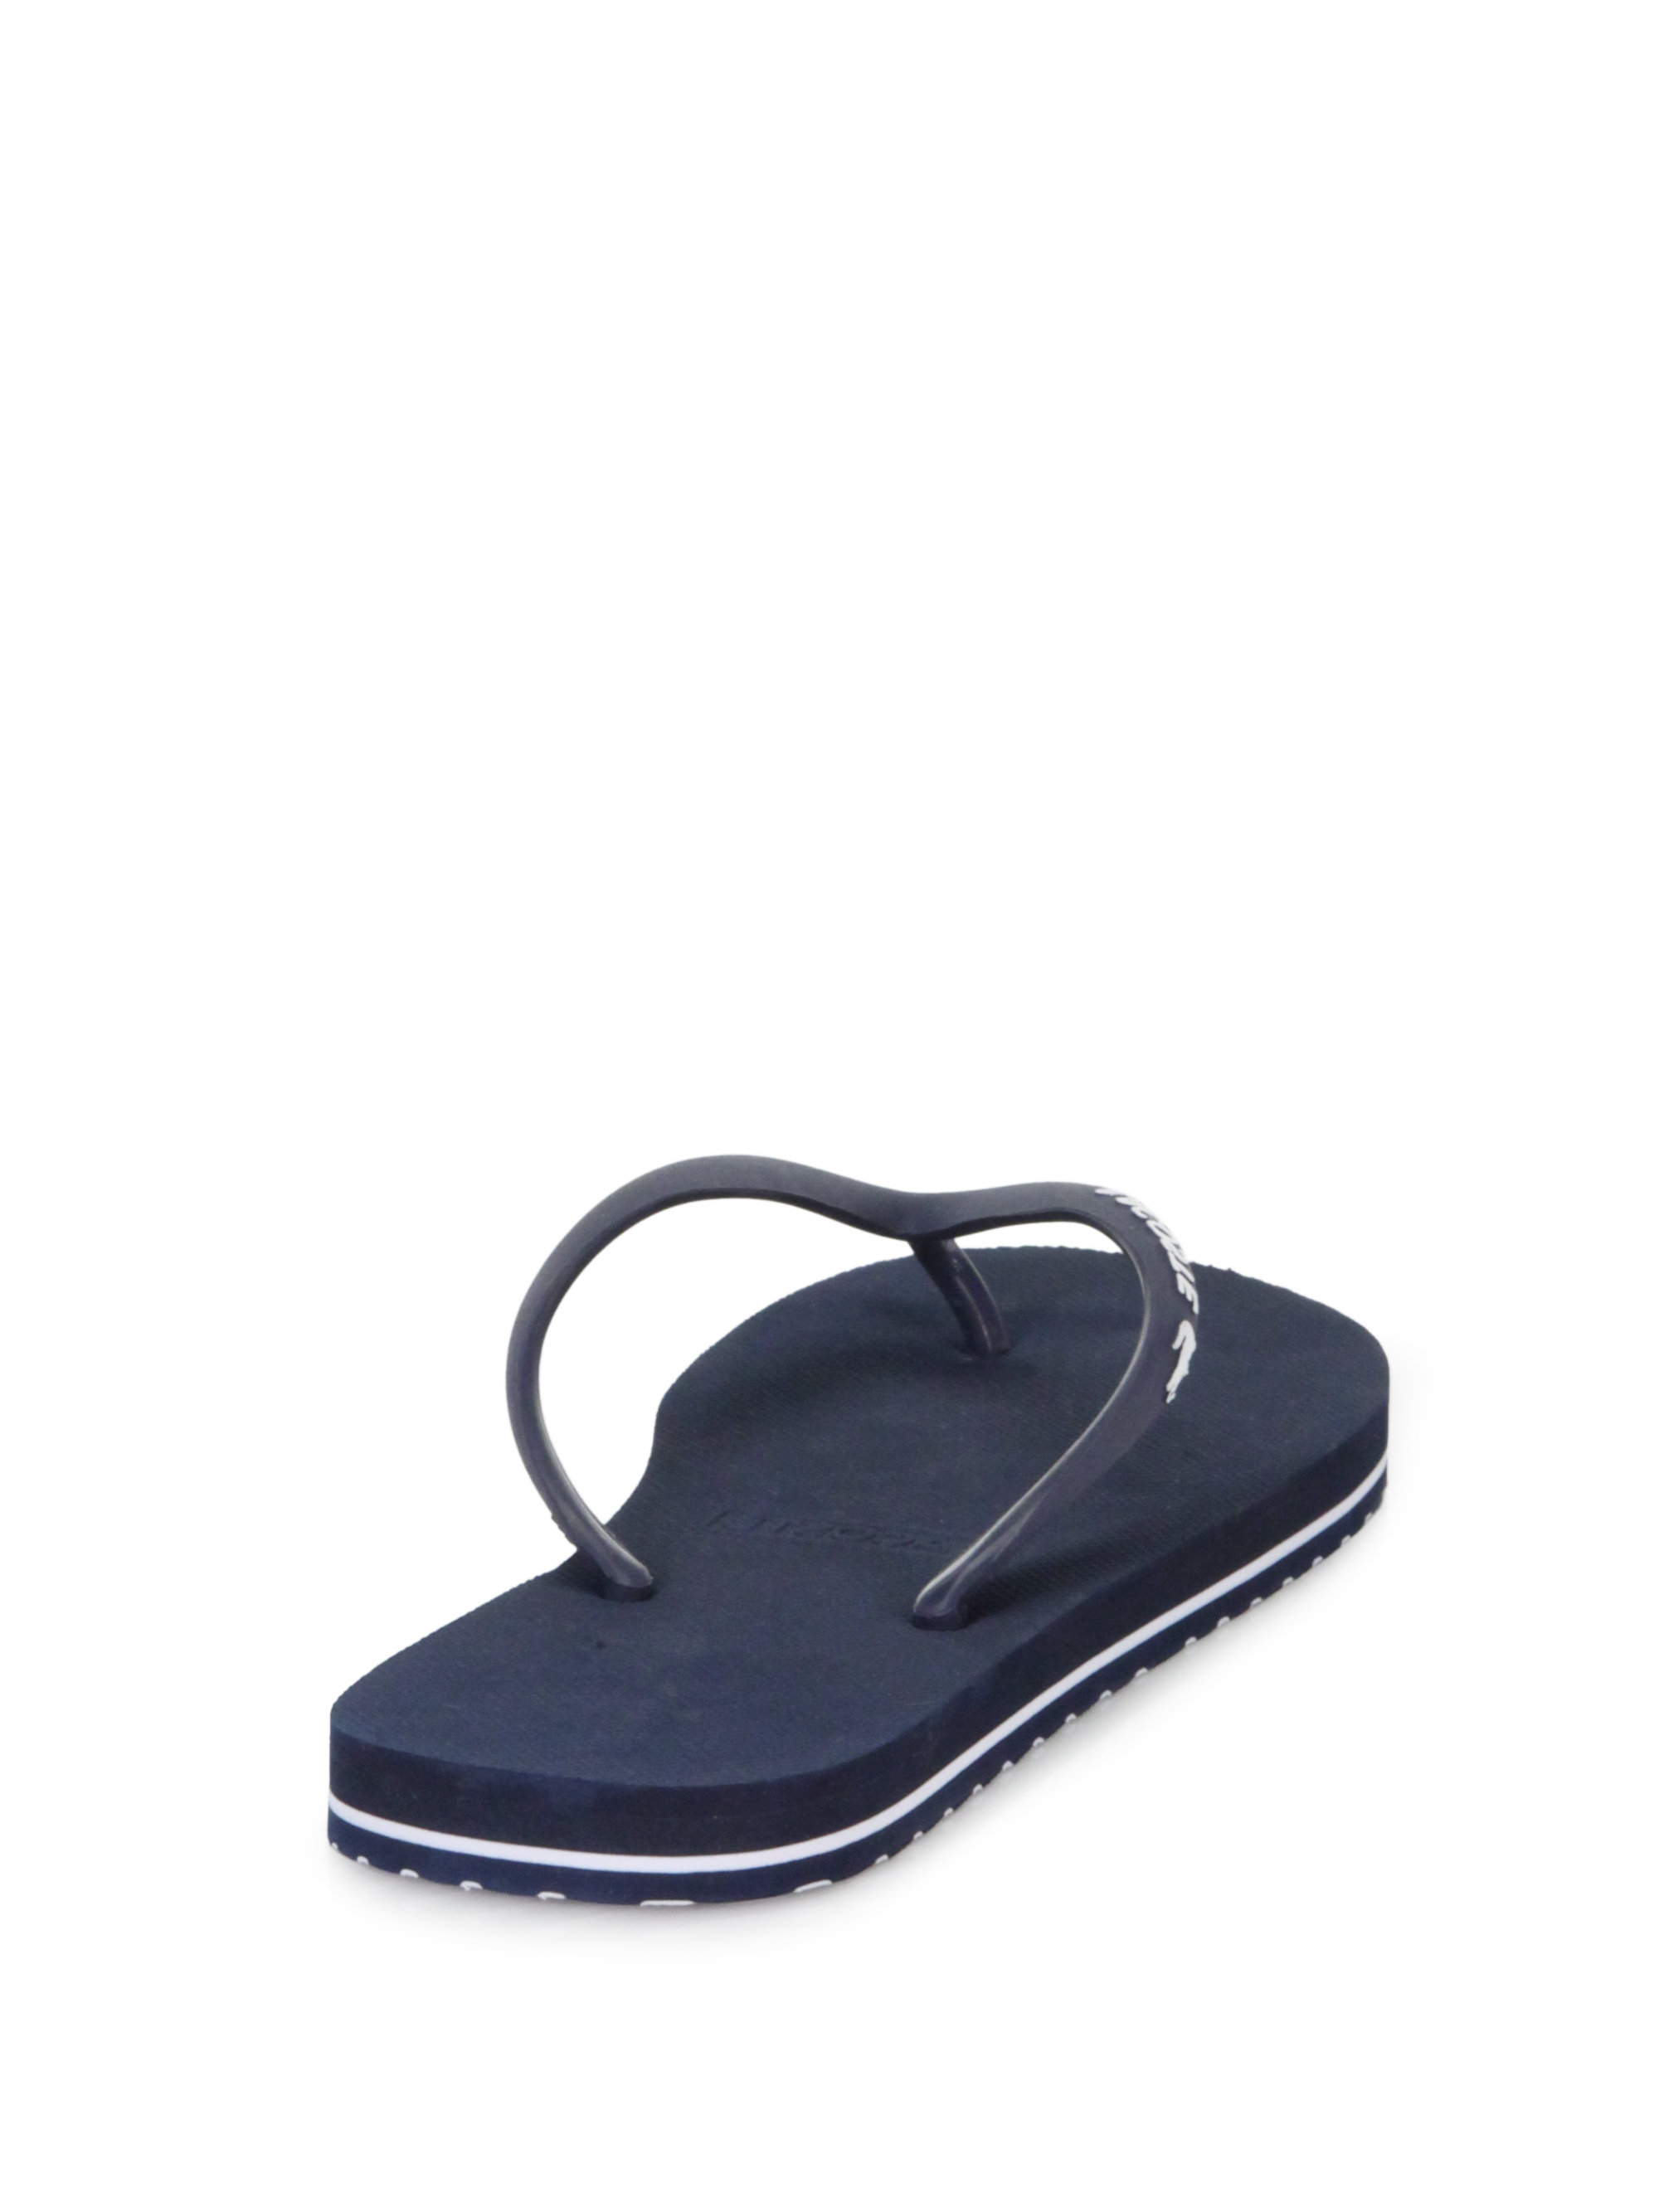 Lacoste Thong Flip Flops in Red for Men - Lyst